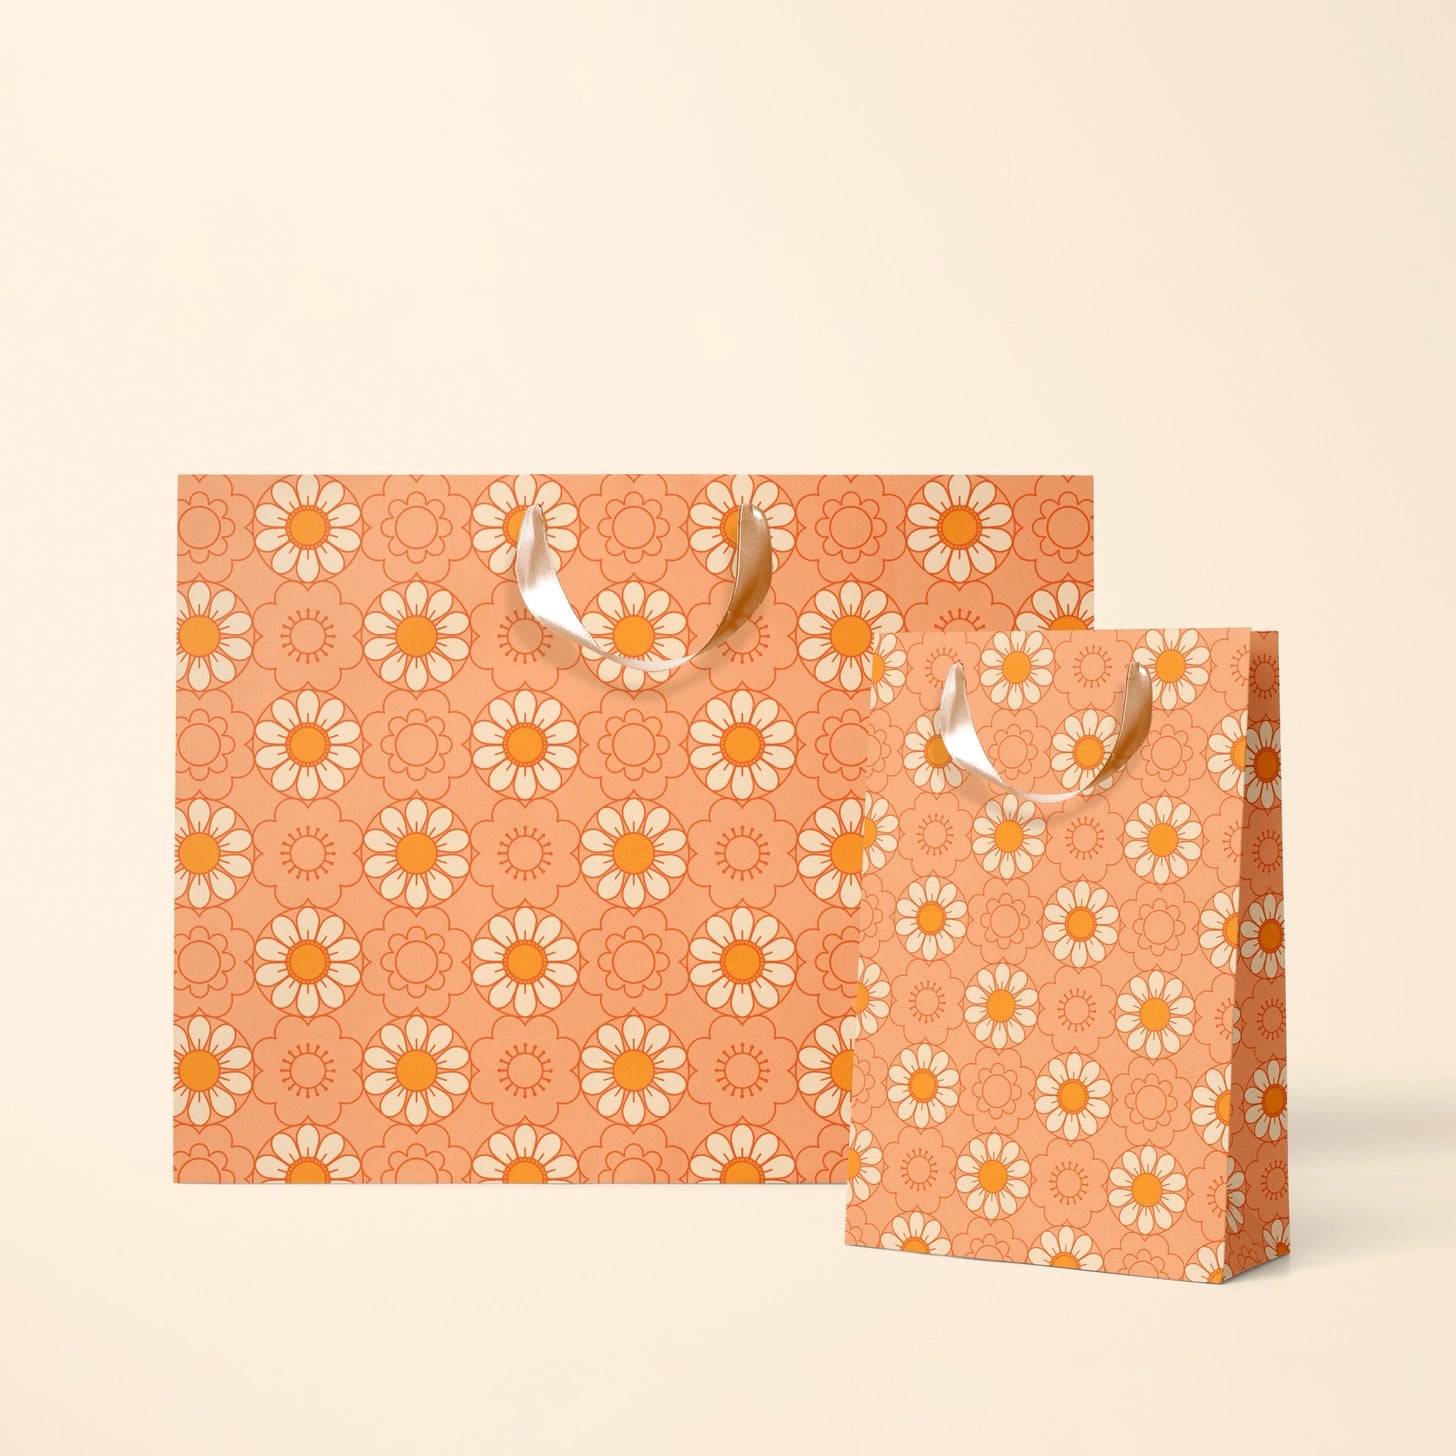 On an ivory background is two orange gift bags with an orange daisy pattern. 